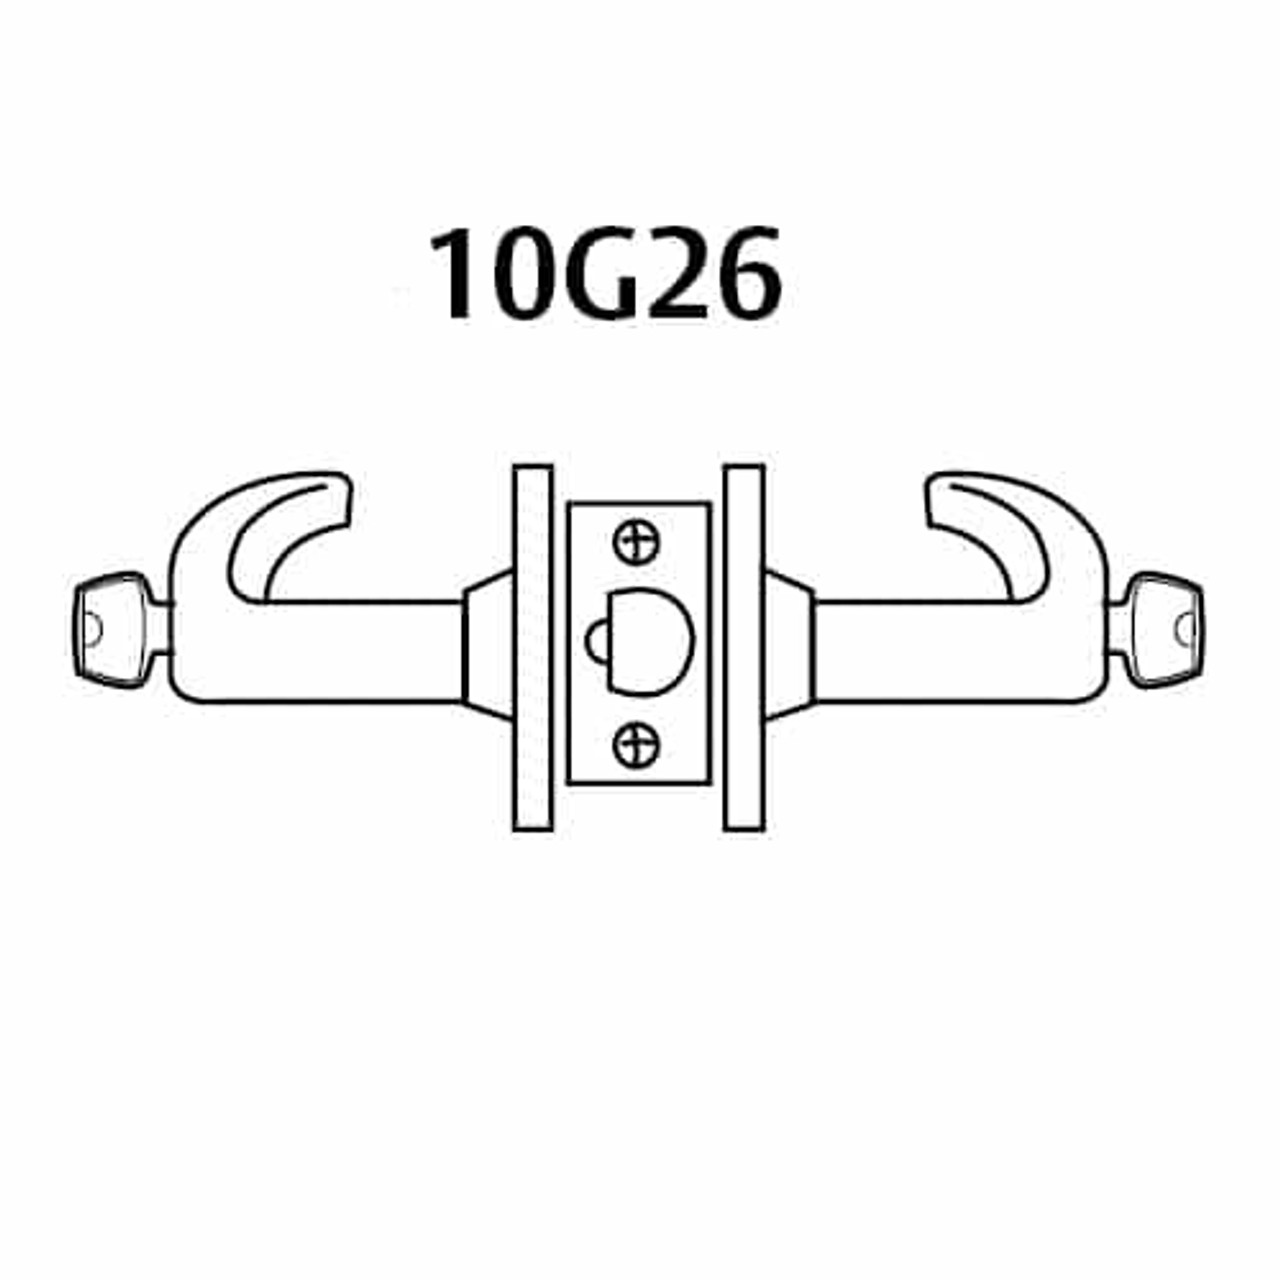 2860-10G26-LL-26D Sargent 10 Line Cylindrical Storeroom Locks with L Lever Design and L Rose Prepped for LFIC in Satin Chrome